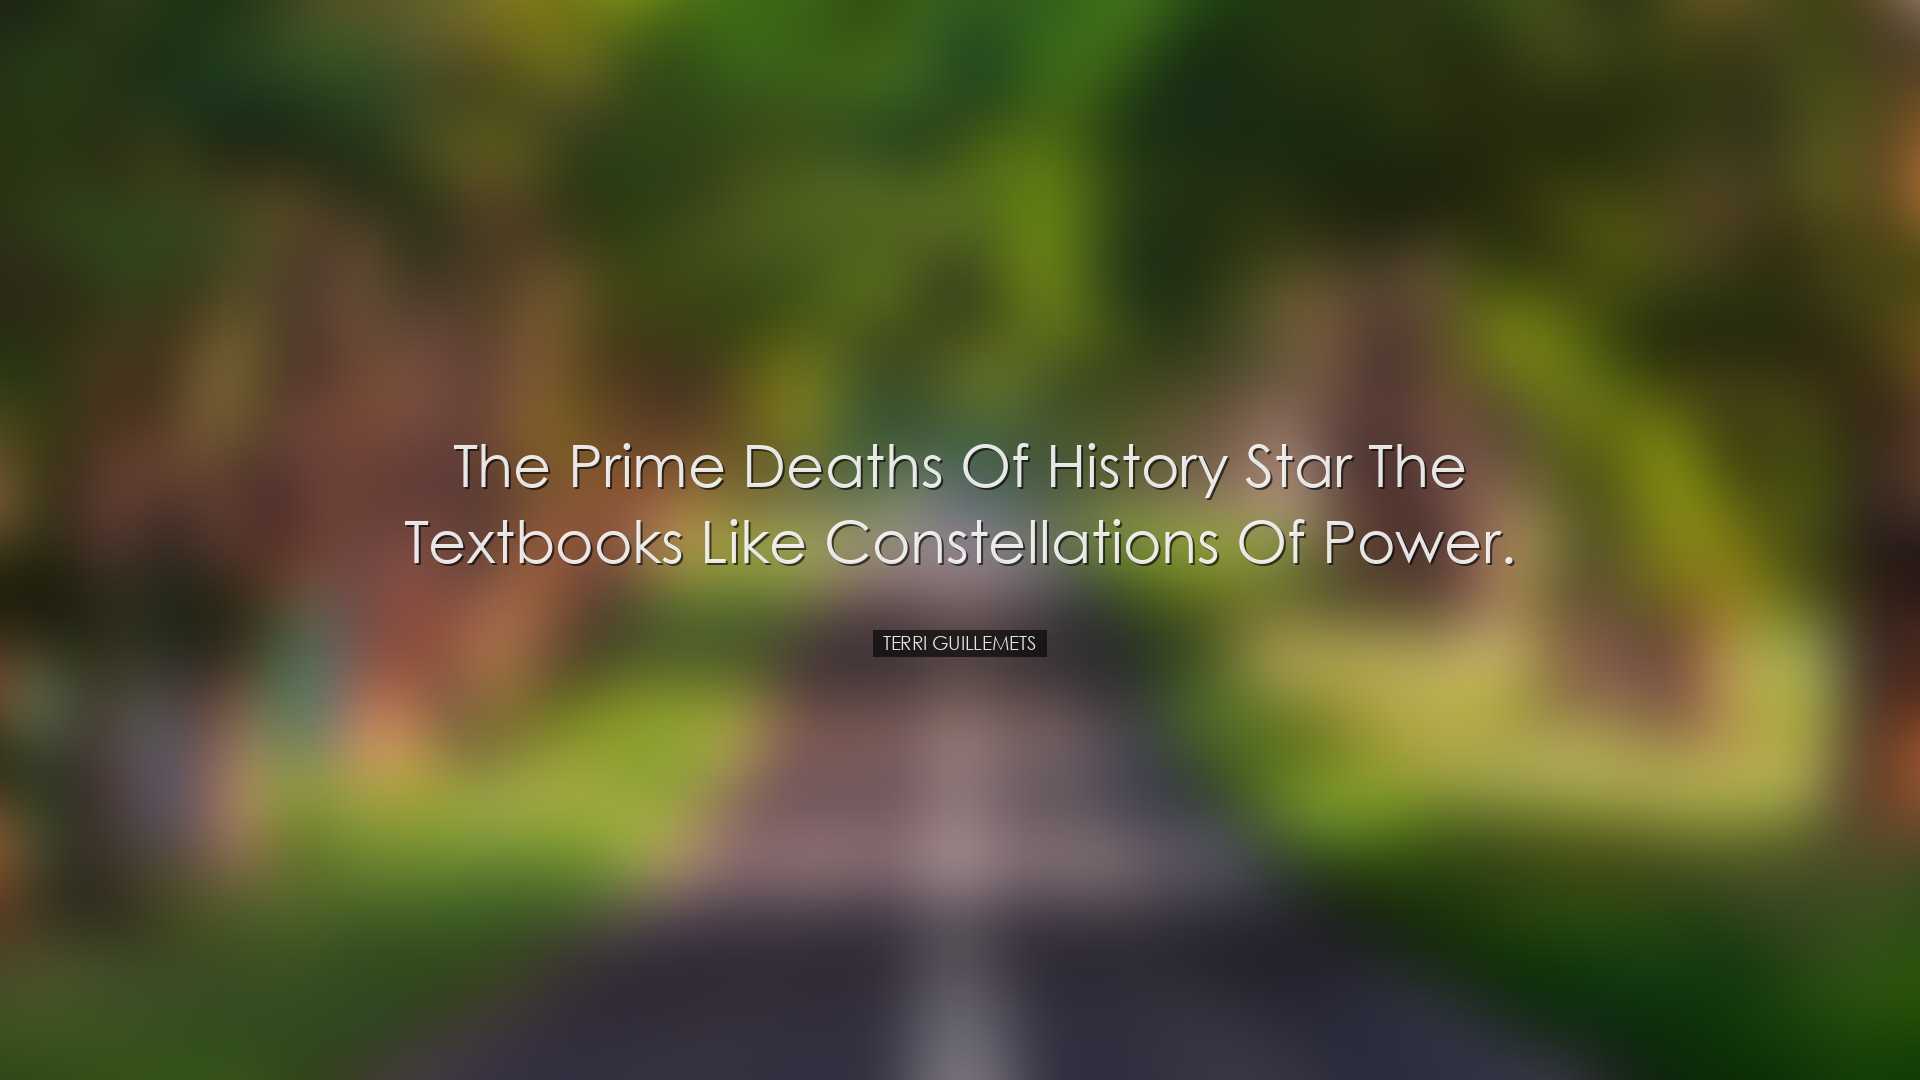 The prime deaths of history star the textbooks like constellations